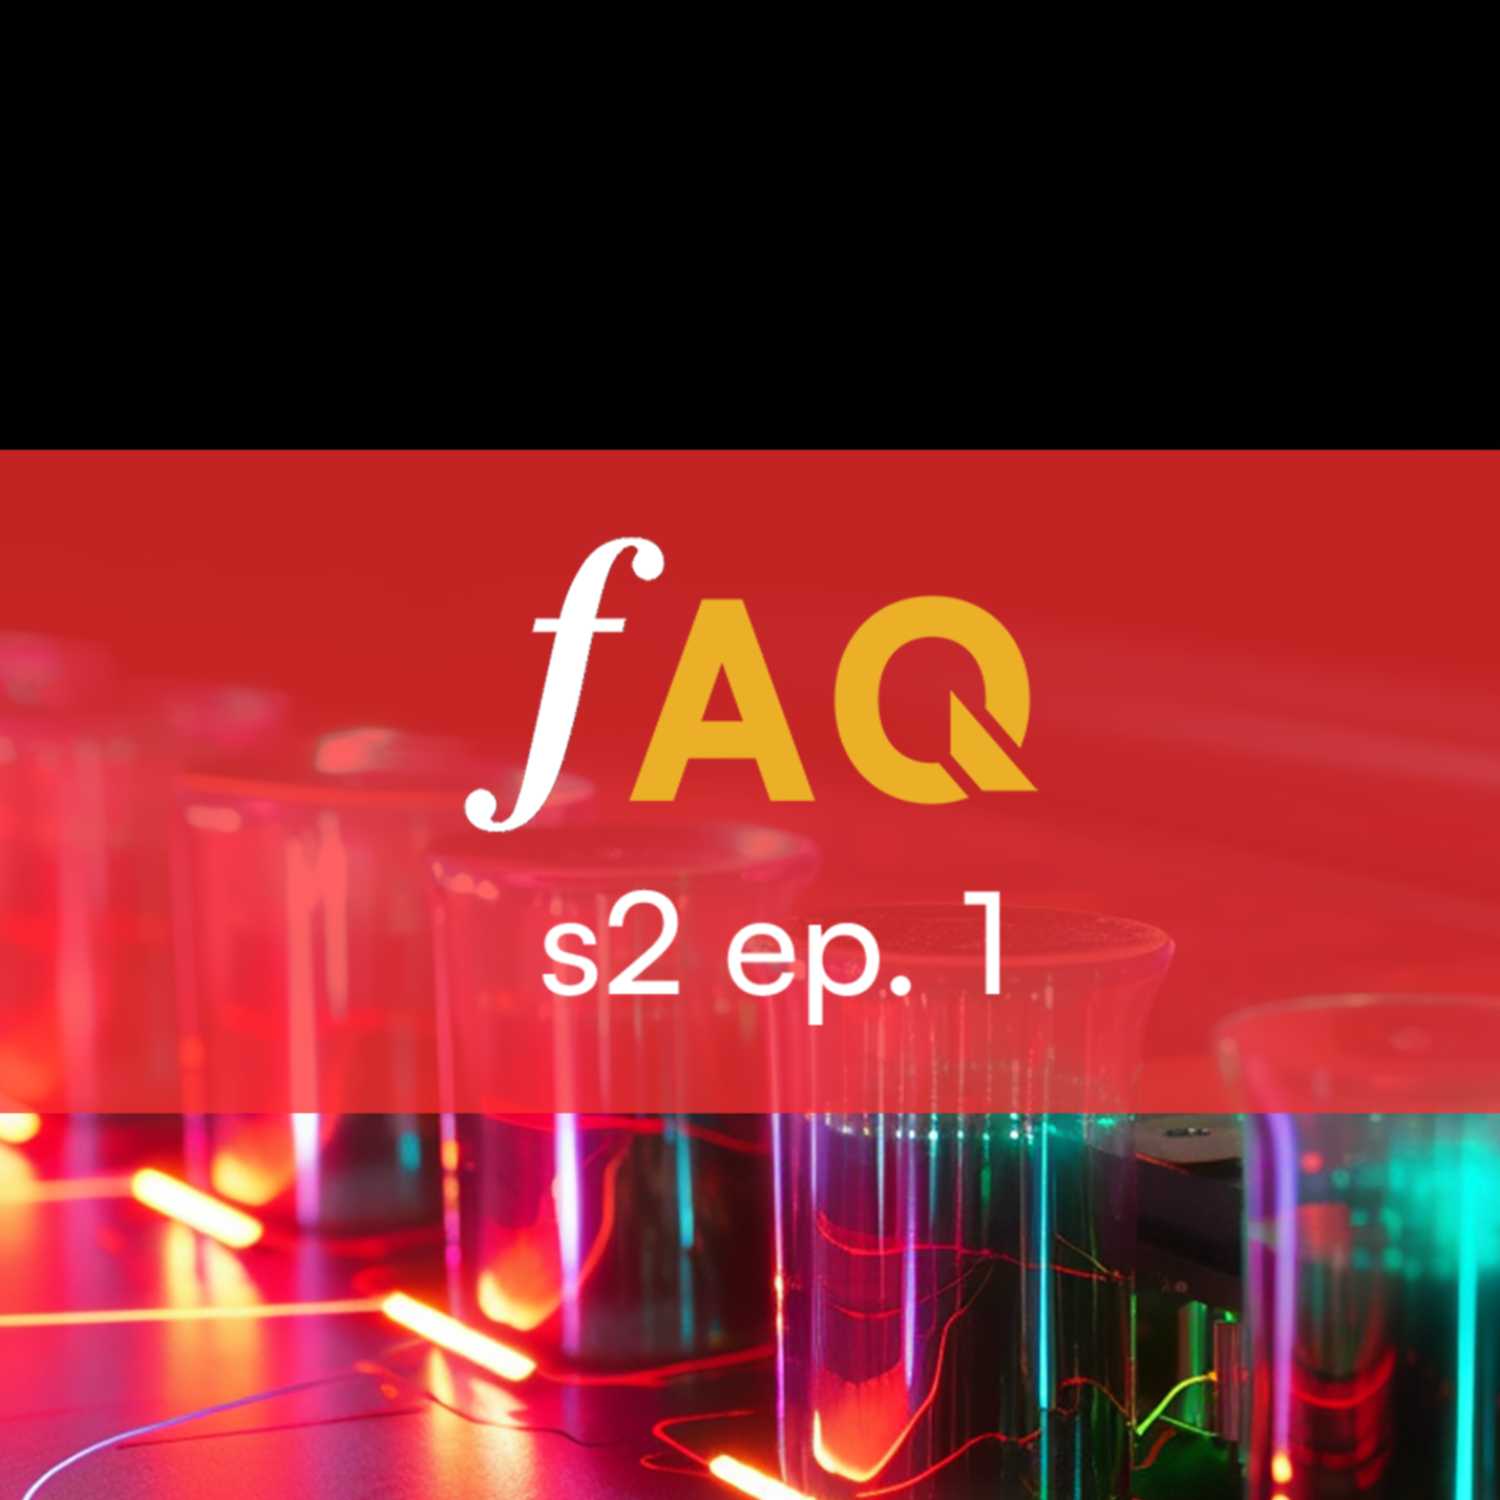 Why care about quantum computing? How does it work? | fAQ podcast - season 2 ep. 1